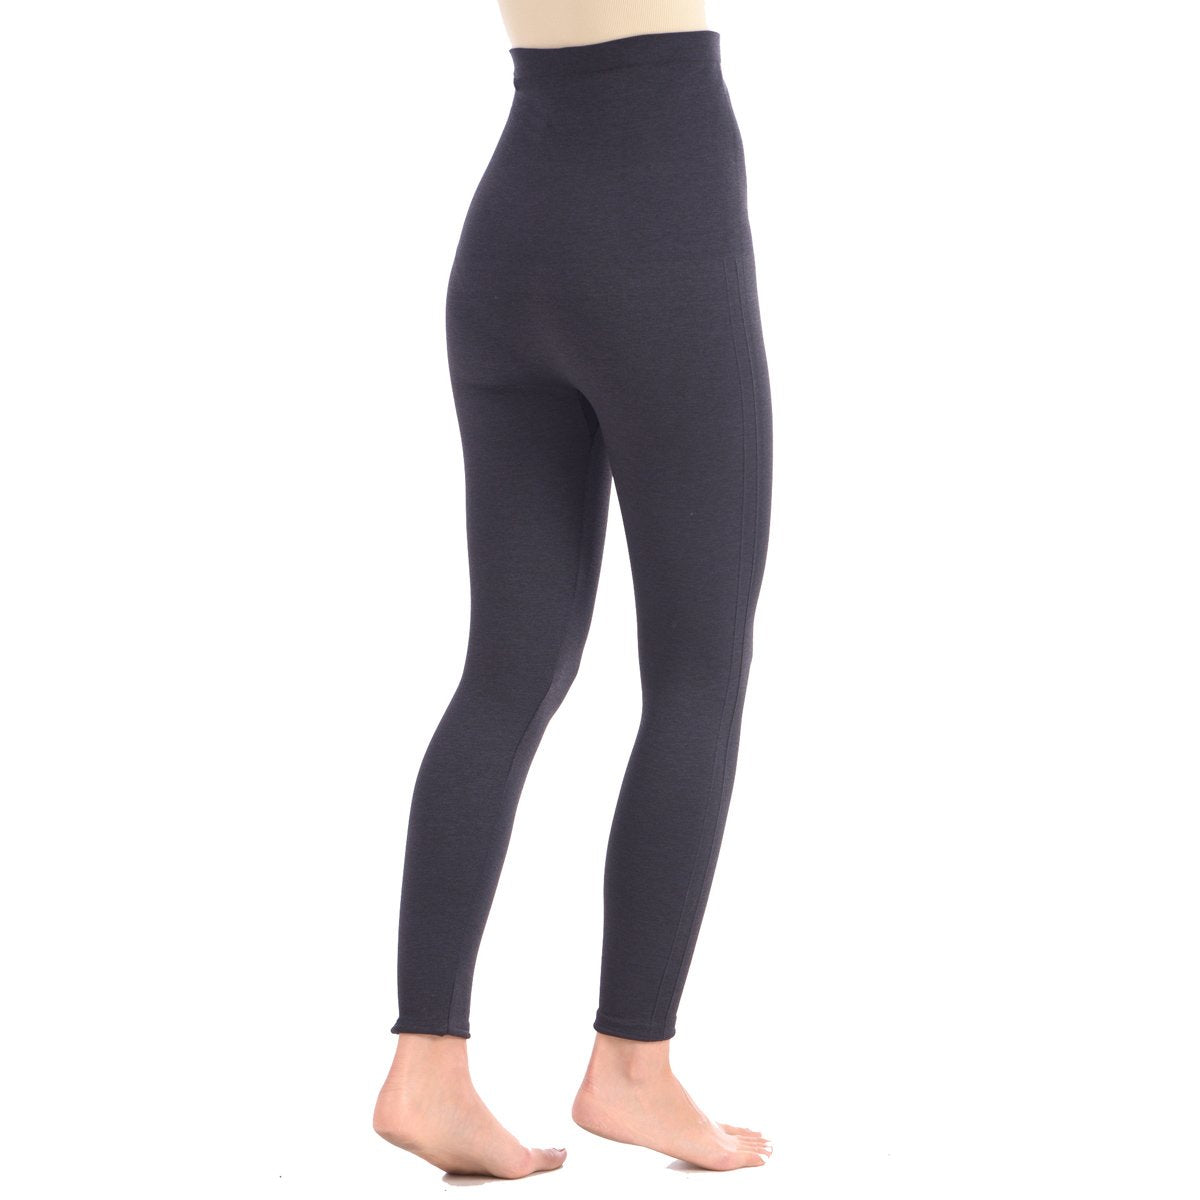 New Shaping Legging With Extra High 8" Waistband